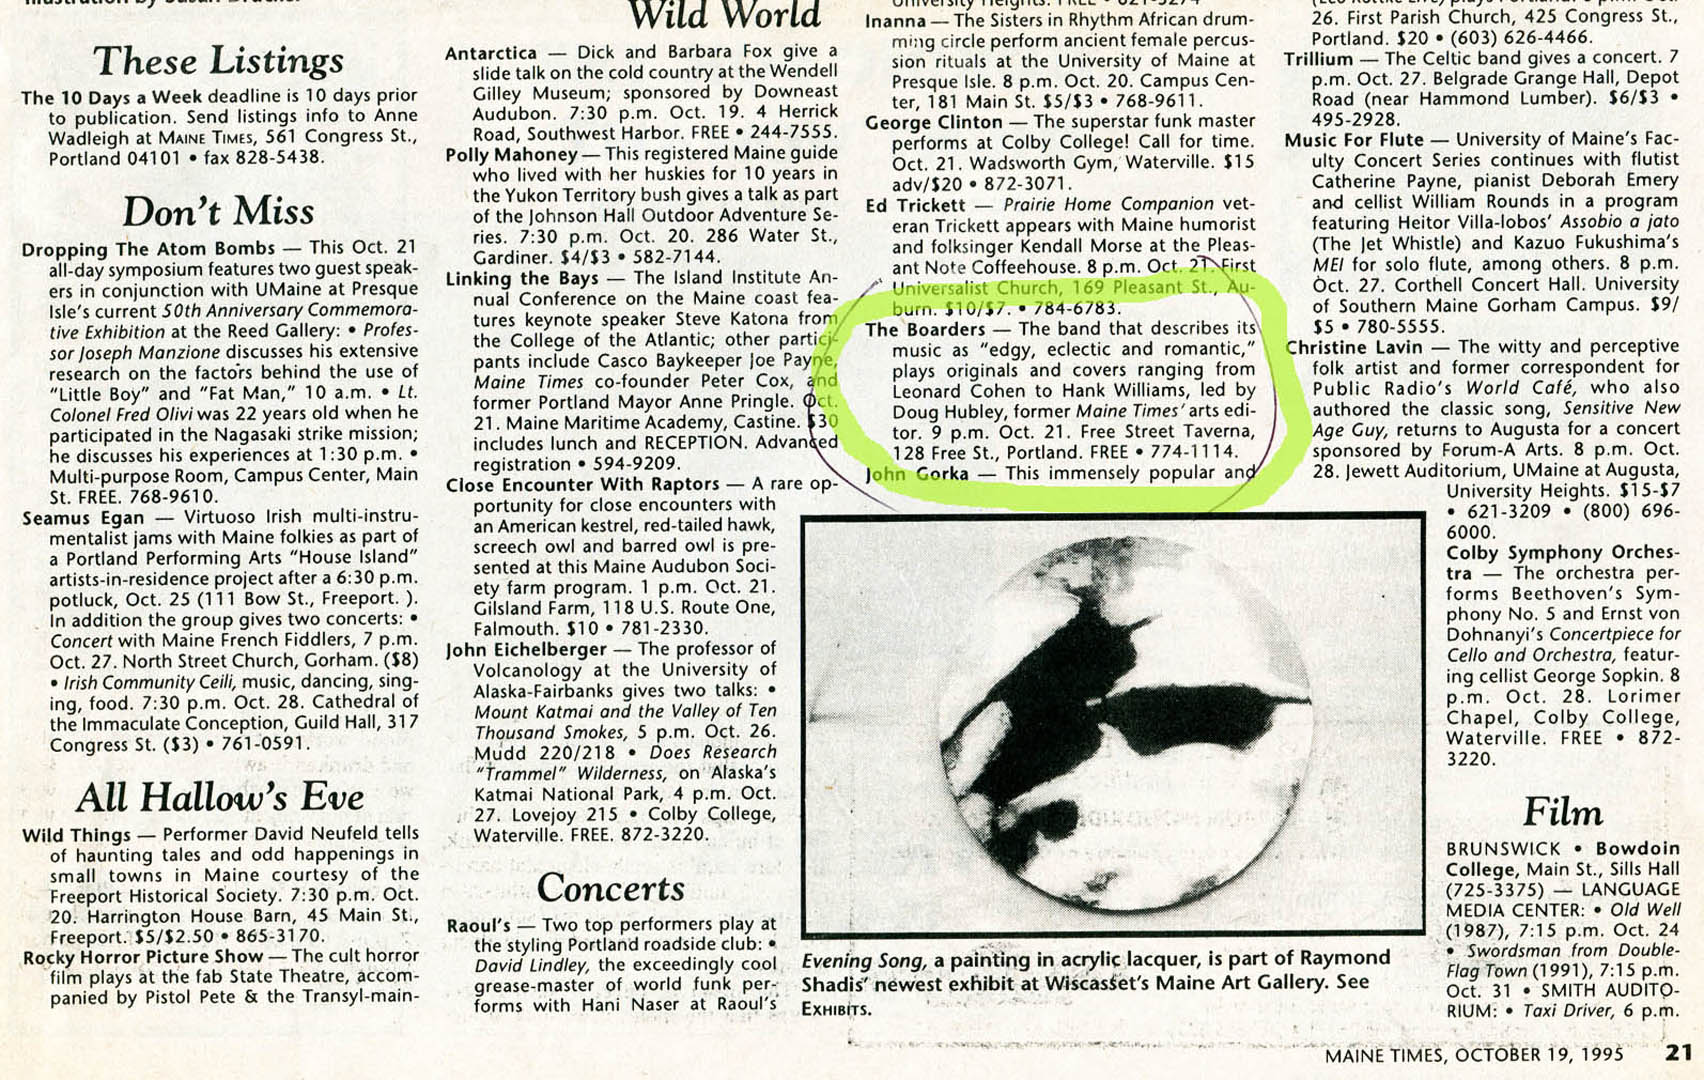 My editing practices remain in evidence in this Boarders listing in Maine Times, where I had worked until July 1995. Hubley Archives.